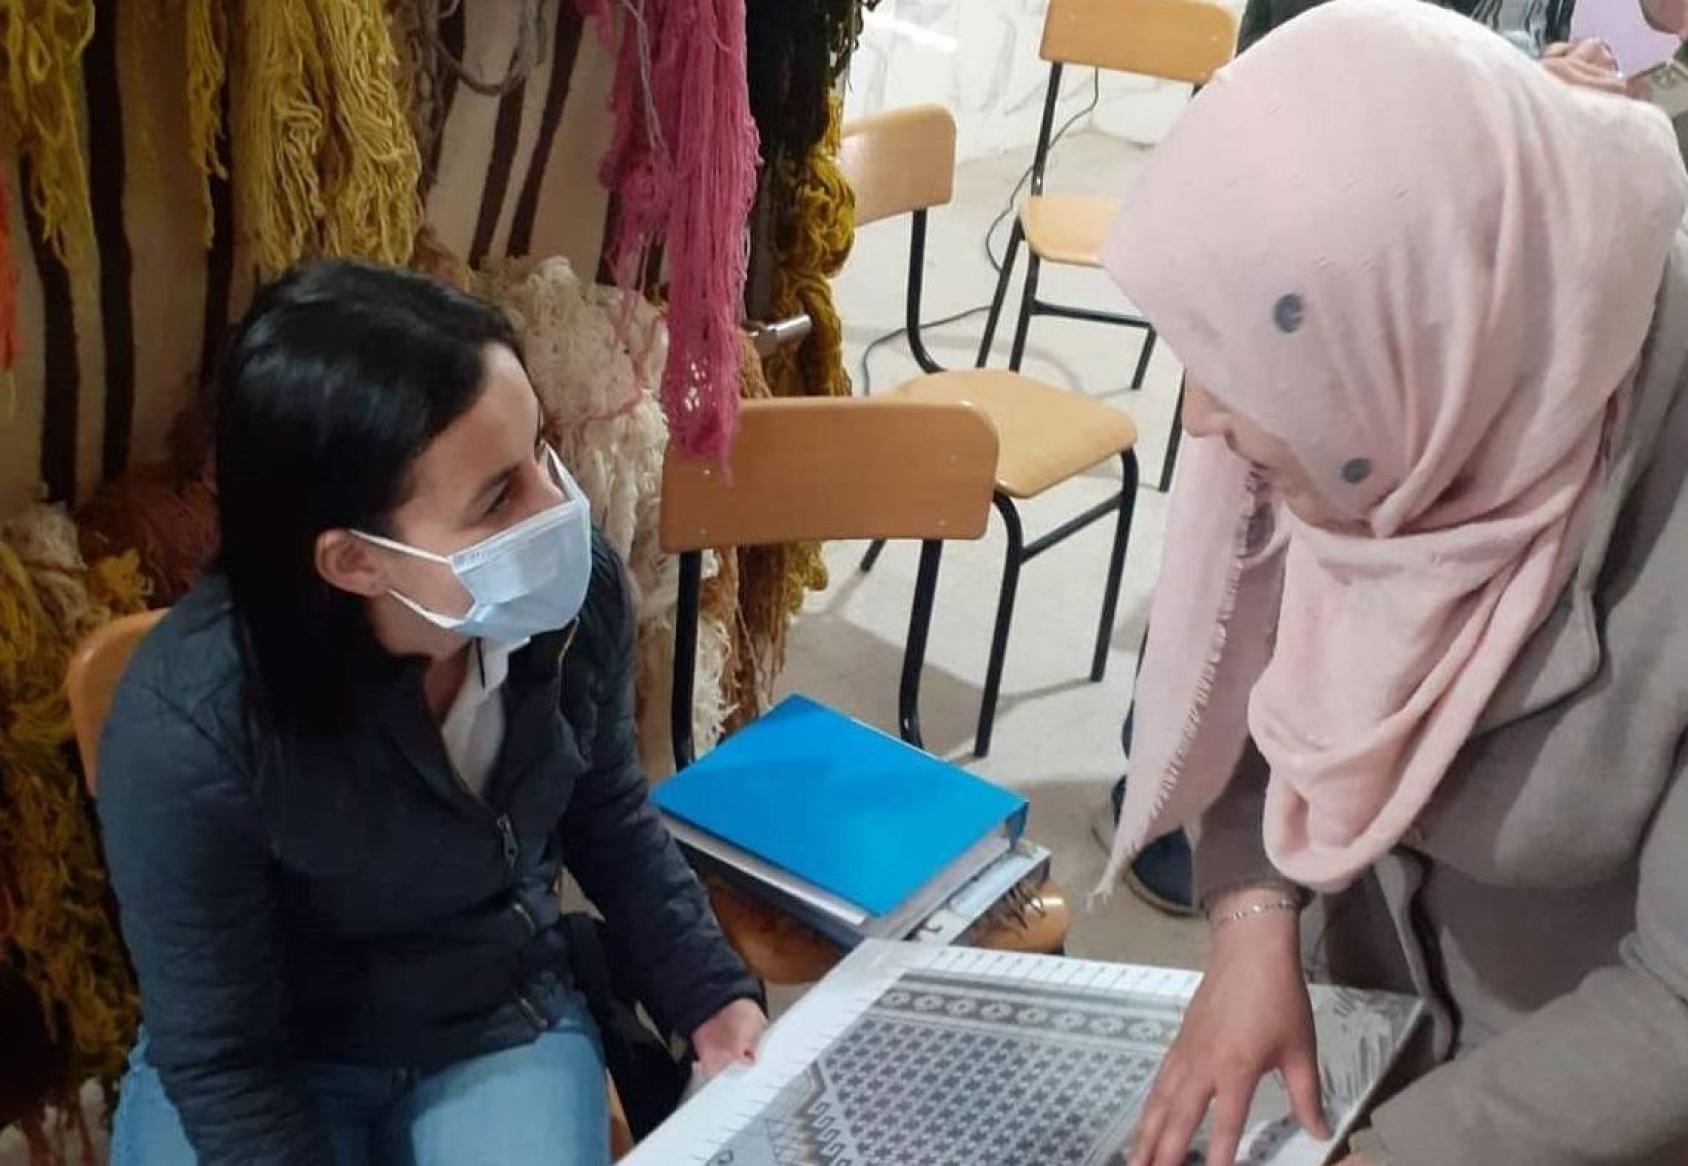 A woman wearing jeans and a face mask talks with a woman wearing a headscarf about a mock-up they both hold in their hands.